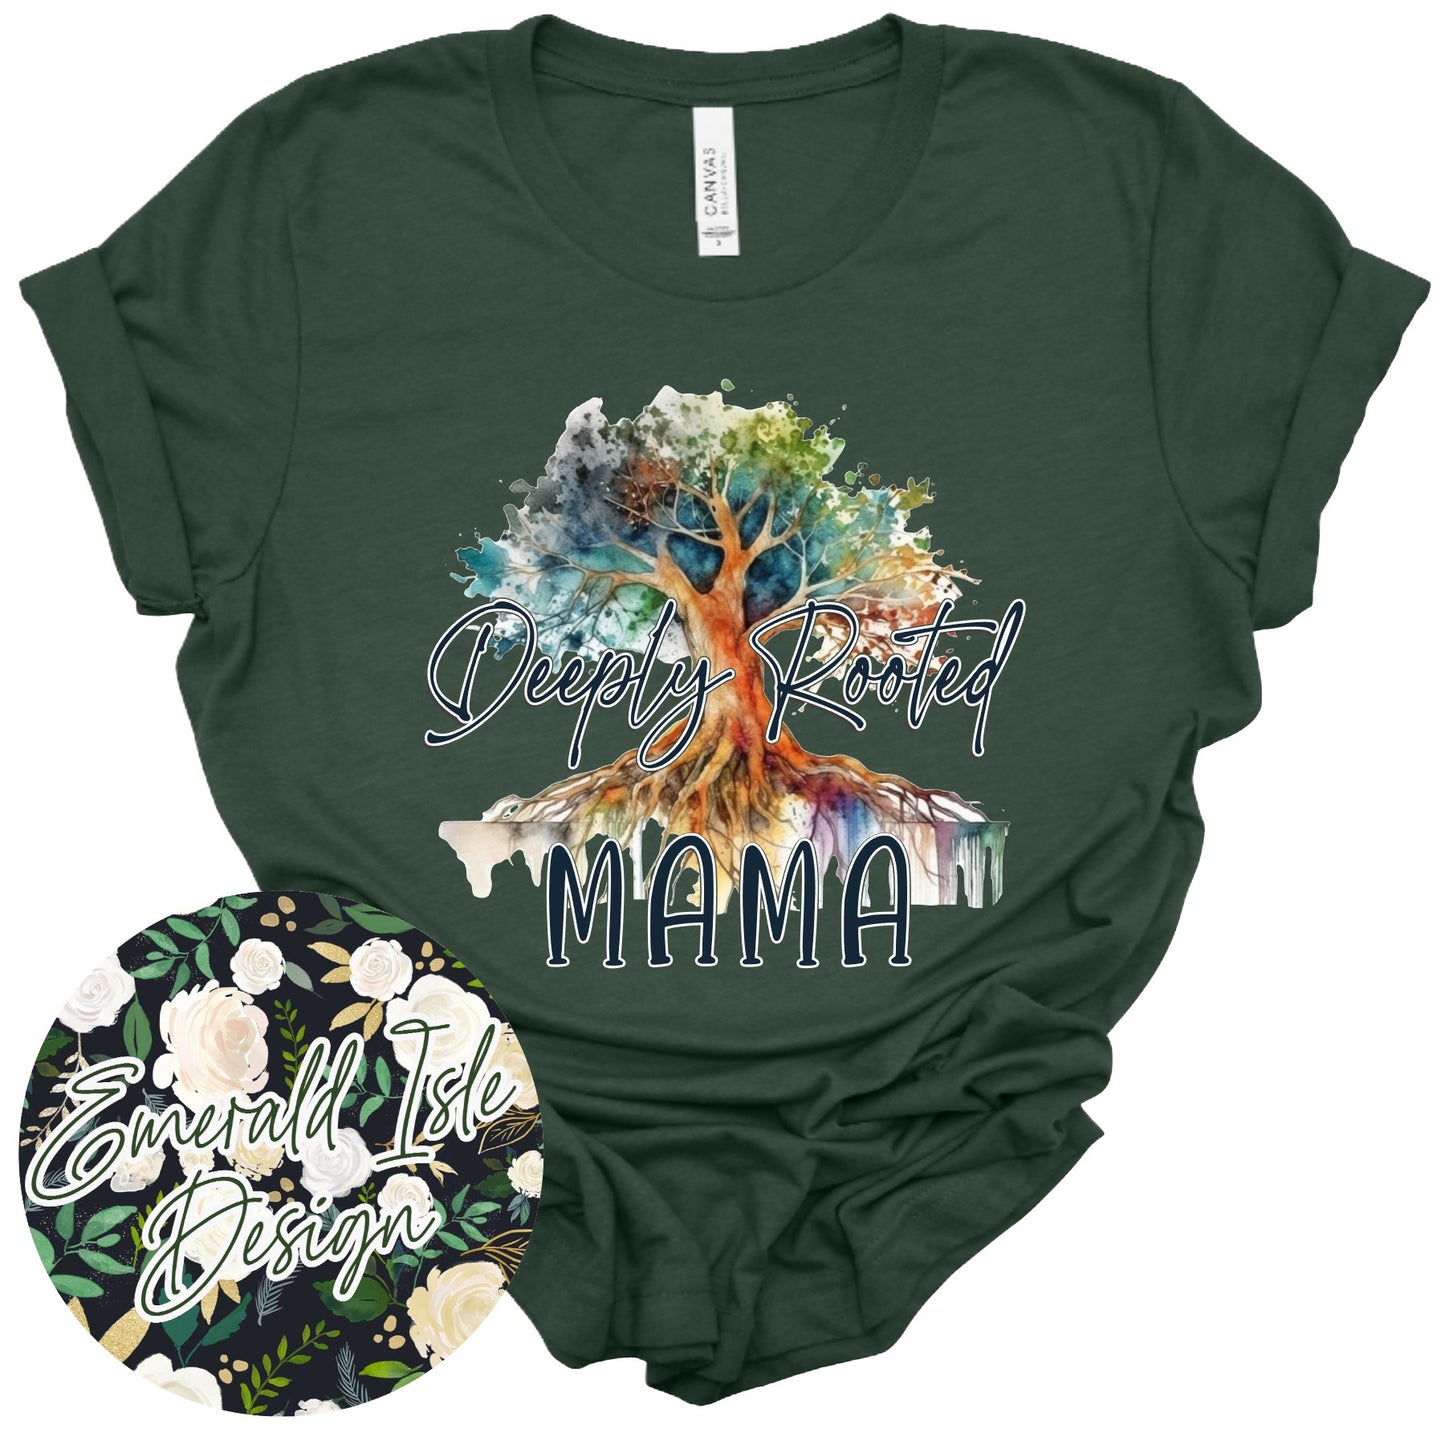 Deeply Rooted Mama Design